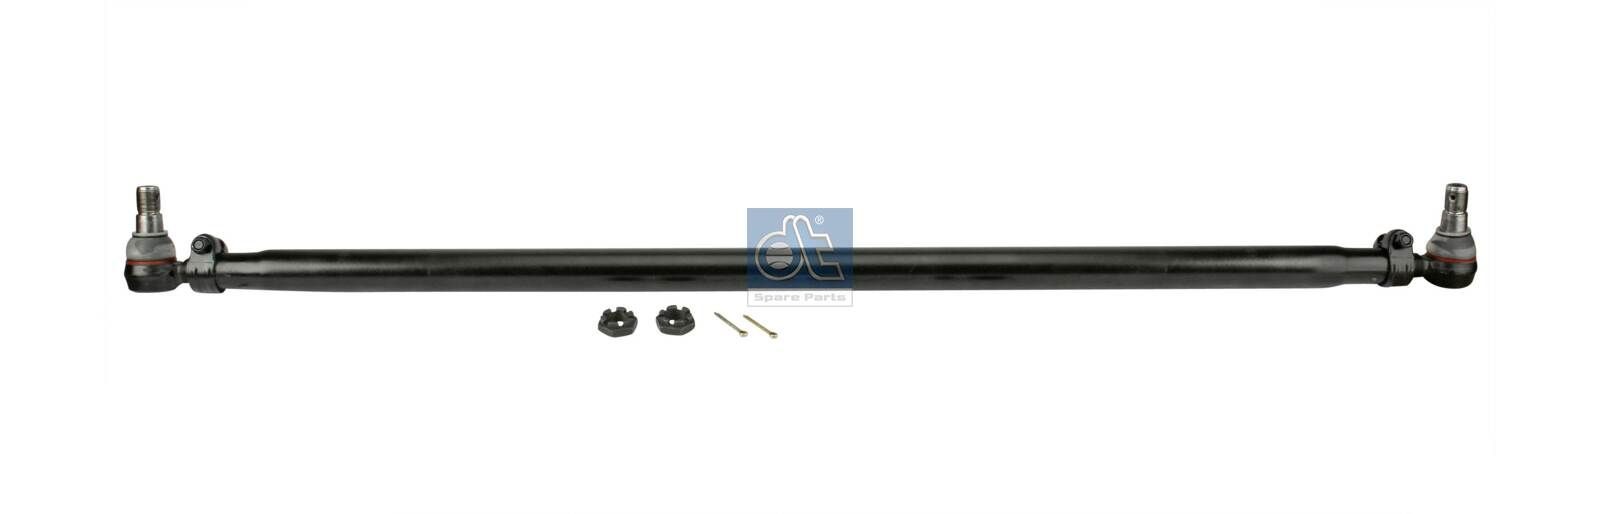 DT Spare Parts 4.62874 Rod Assembly 949 330 12 03